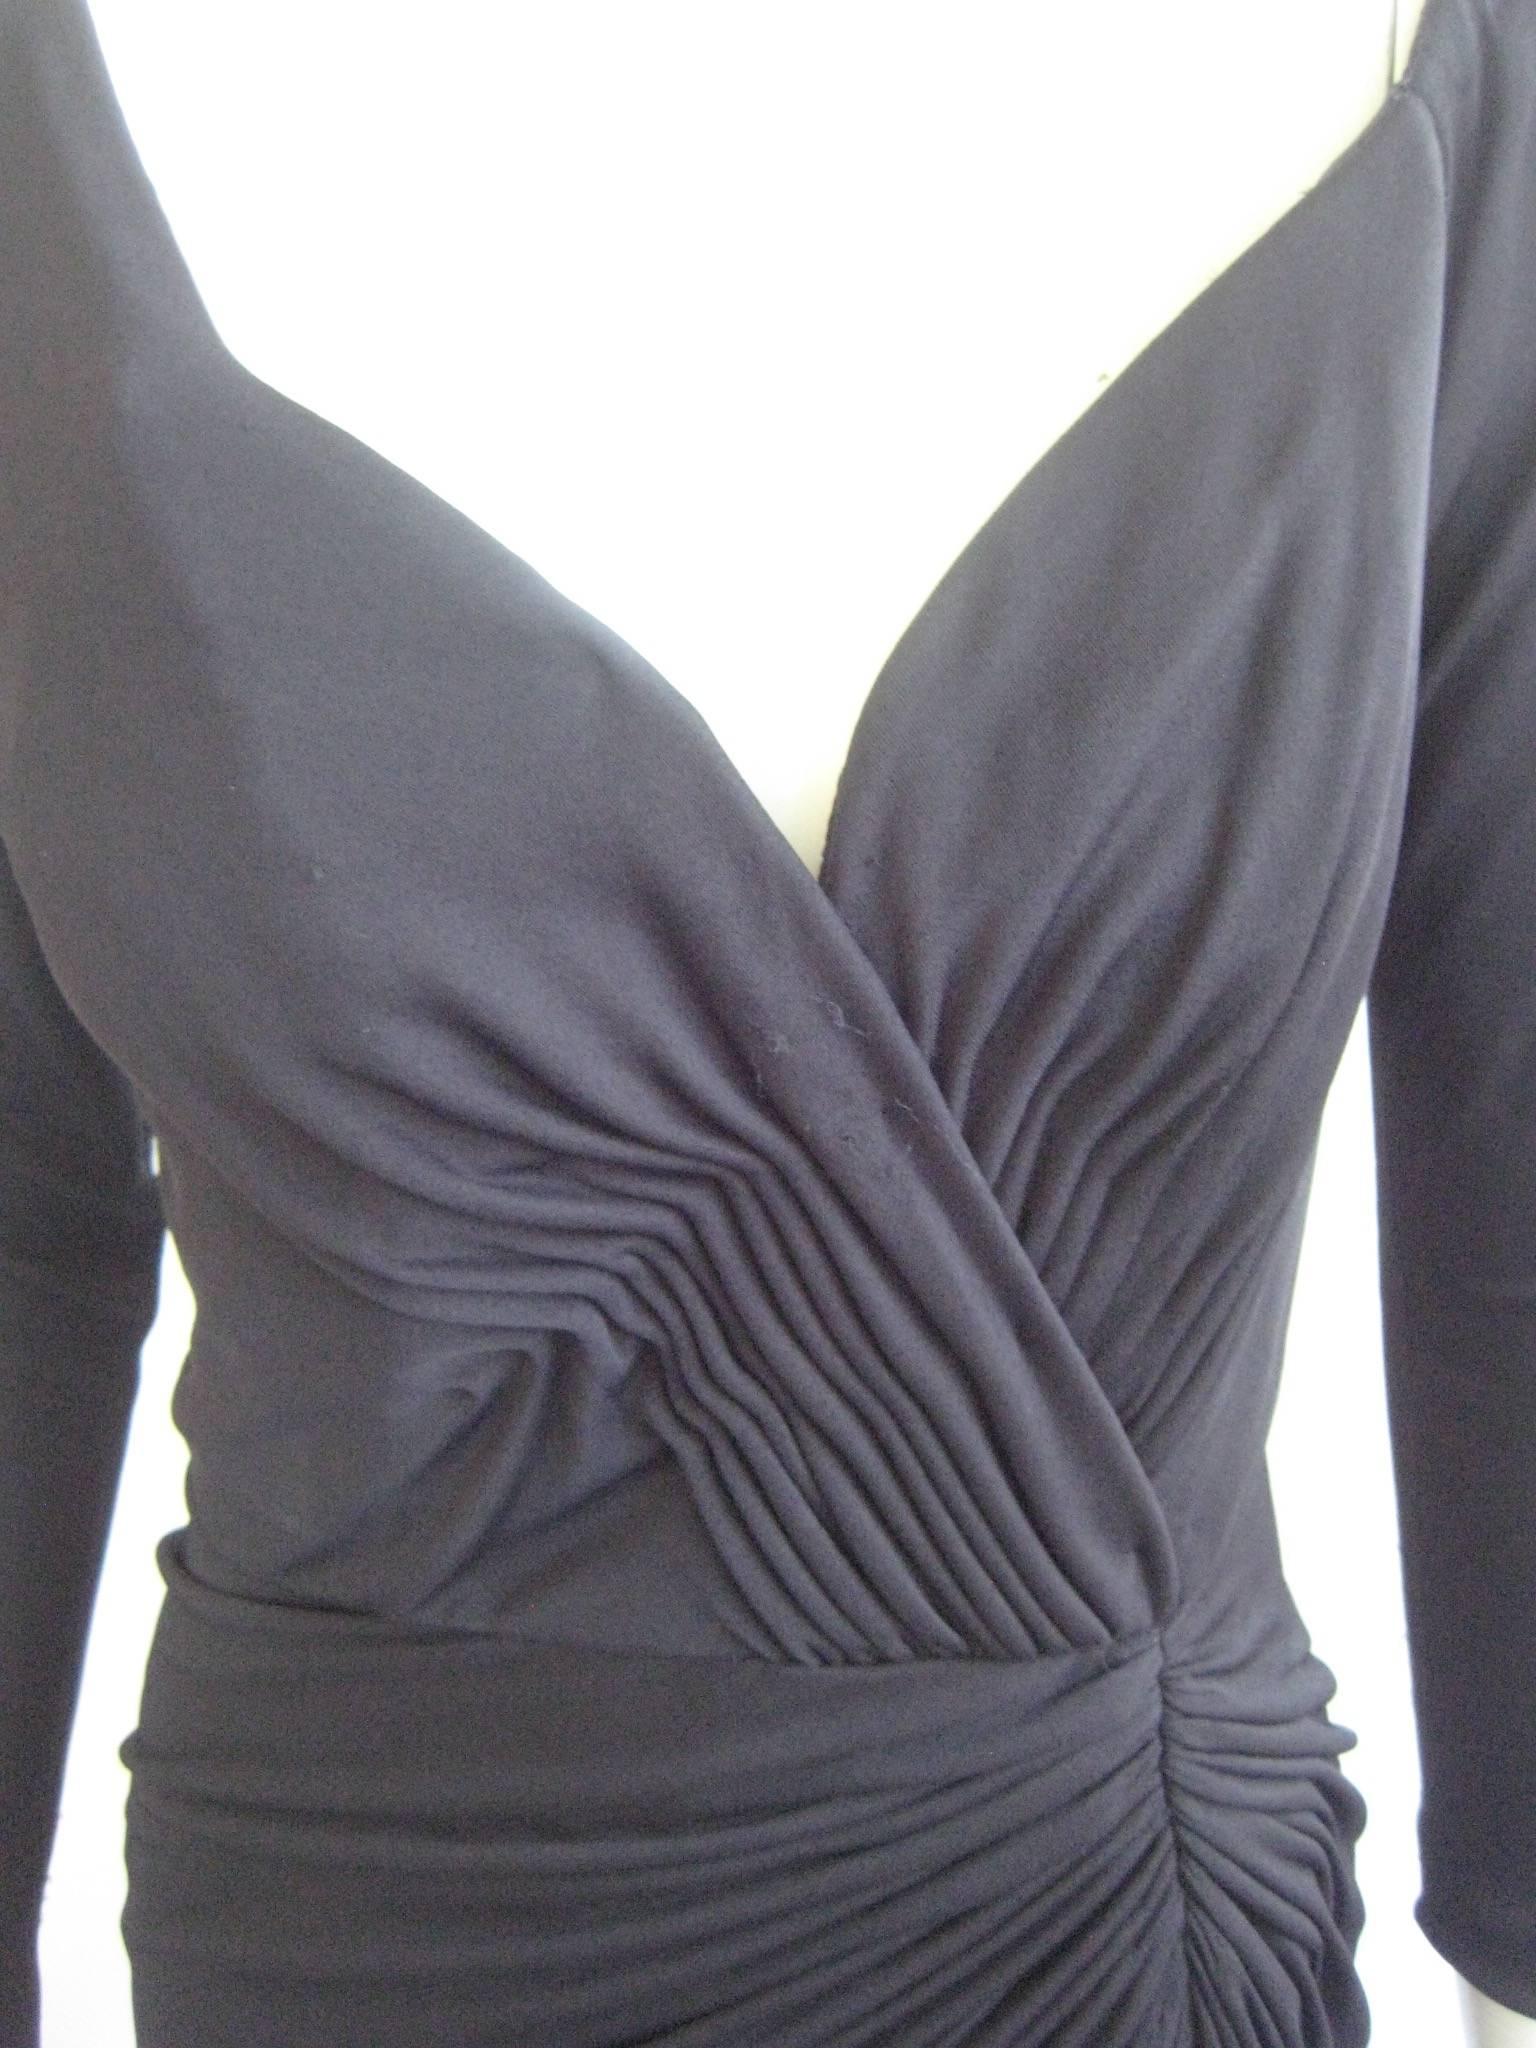 Amazing vintage Vicky Tiel couture cocktail evening gown
Shirred bodice
Zipper up the back
Long slit up the front
36 -26 36 length 53
100% rayon jersey knit

